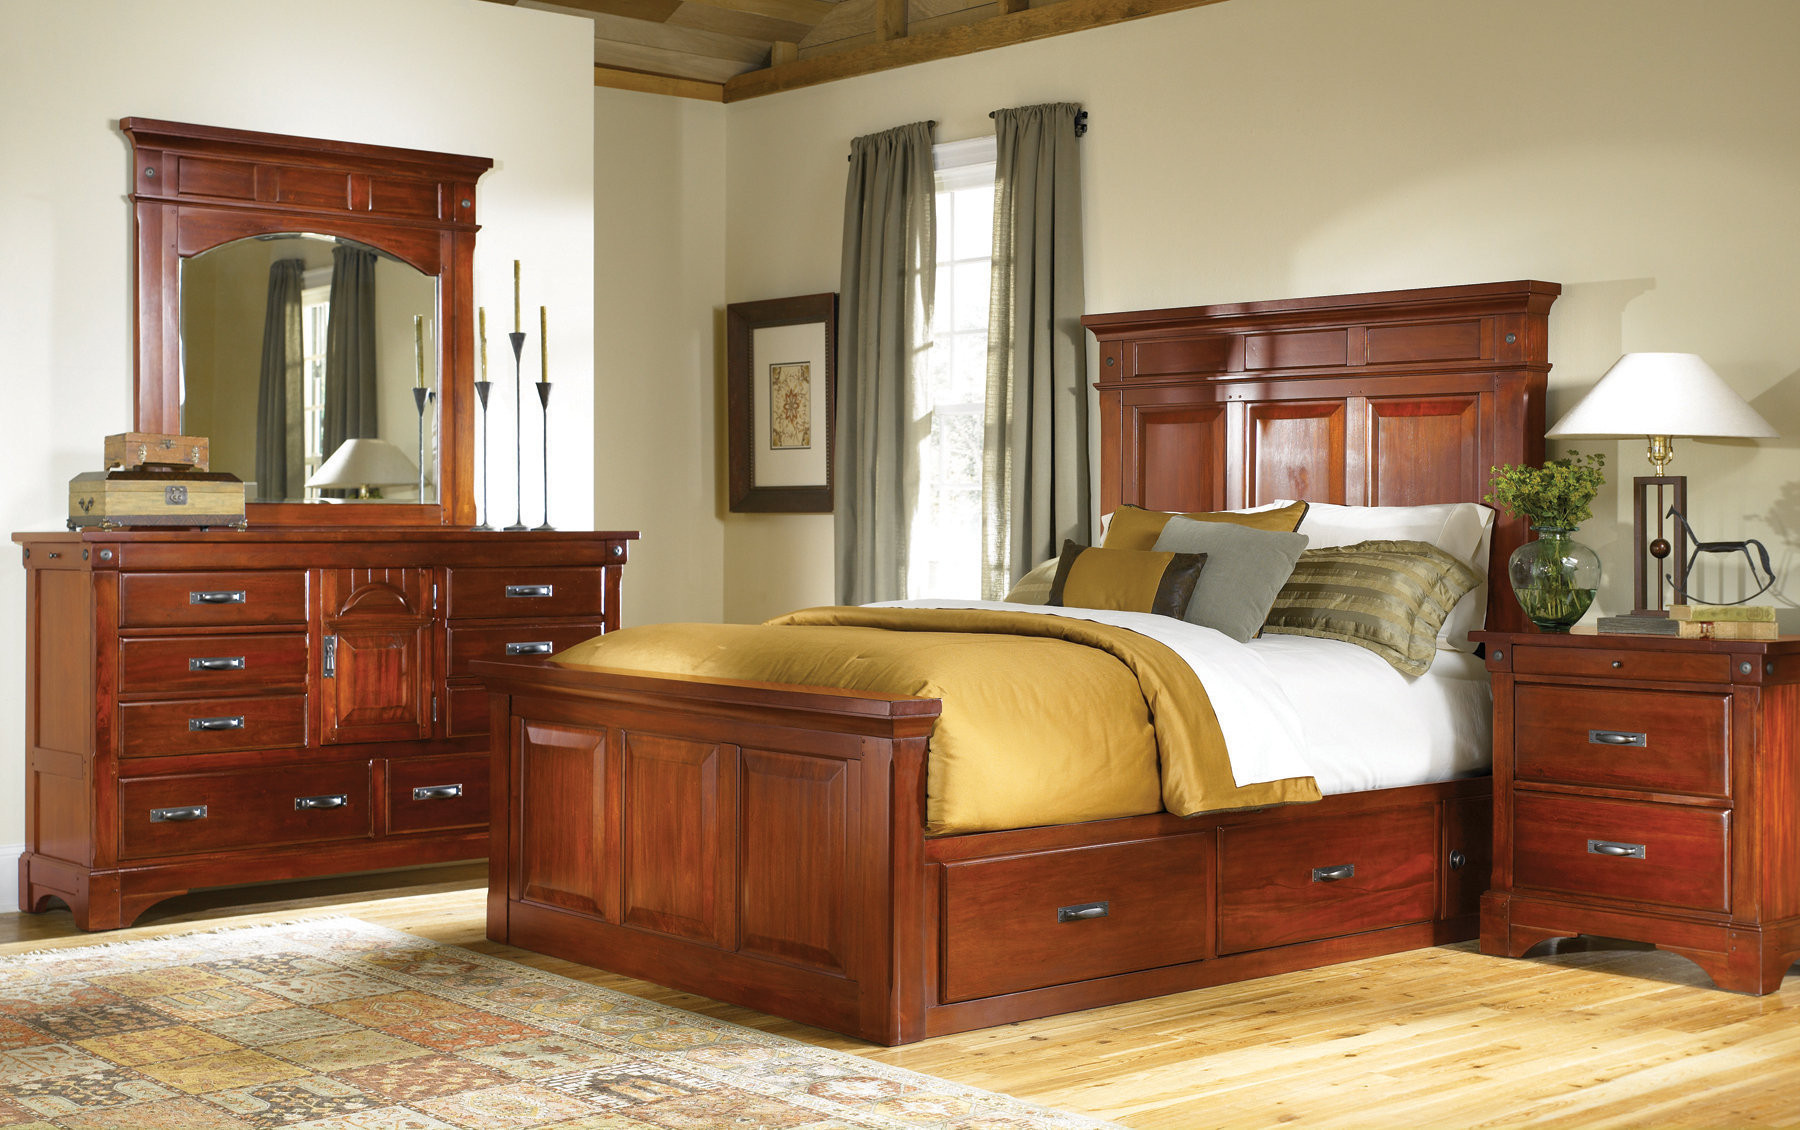 Storage Bed Bedroom Set
 Mahogany Storage Bed Classic King and Queen Solid Wood